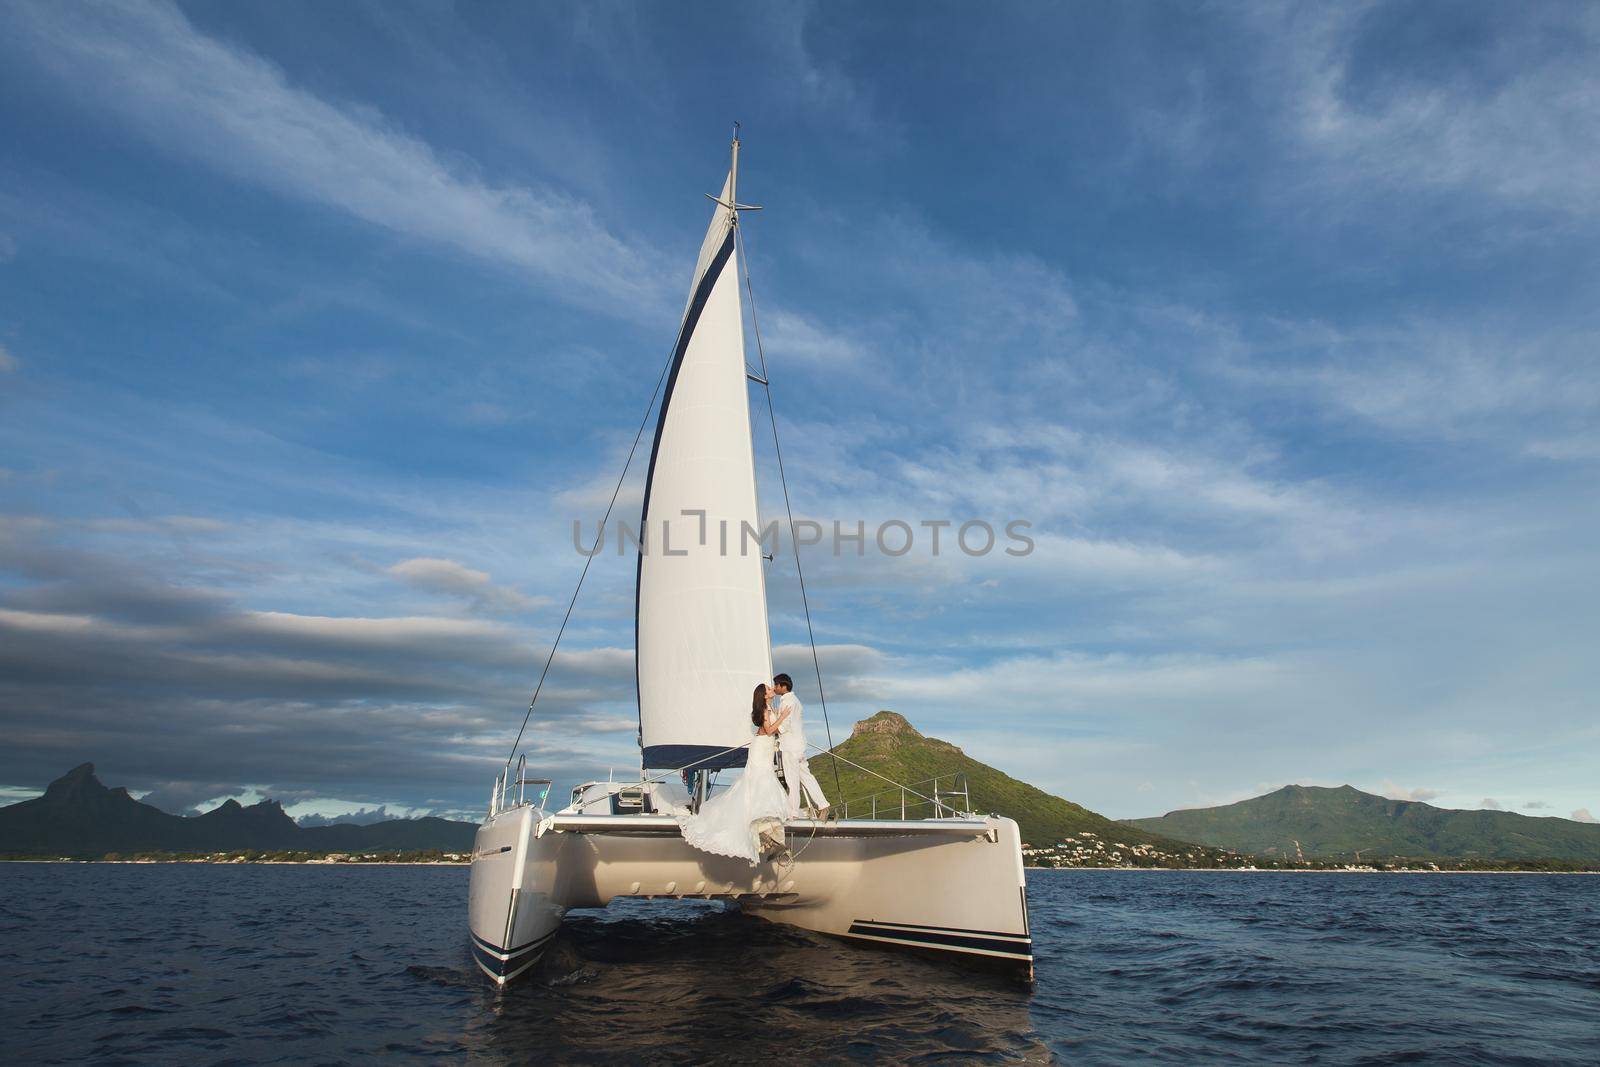 Beautiful wedding couple bride and groom on yacht at wedding day outdoors in the sea. Happy marriage couple kissing on boat in ocean. Stylish Marine wedding.